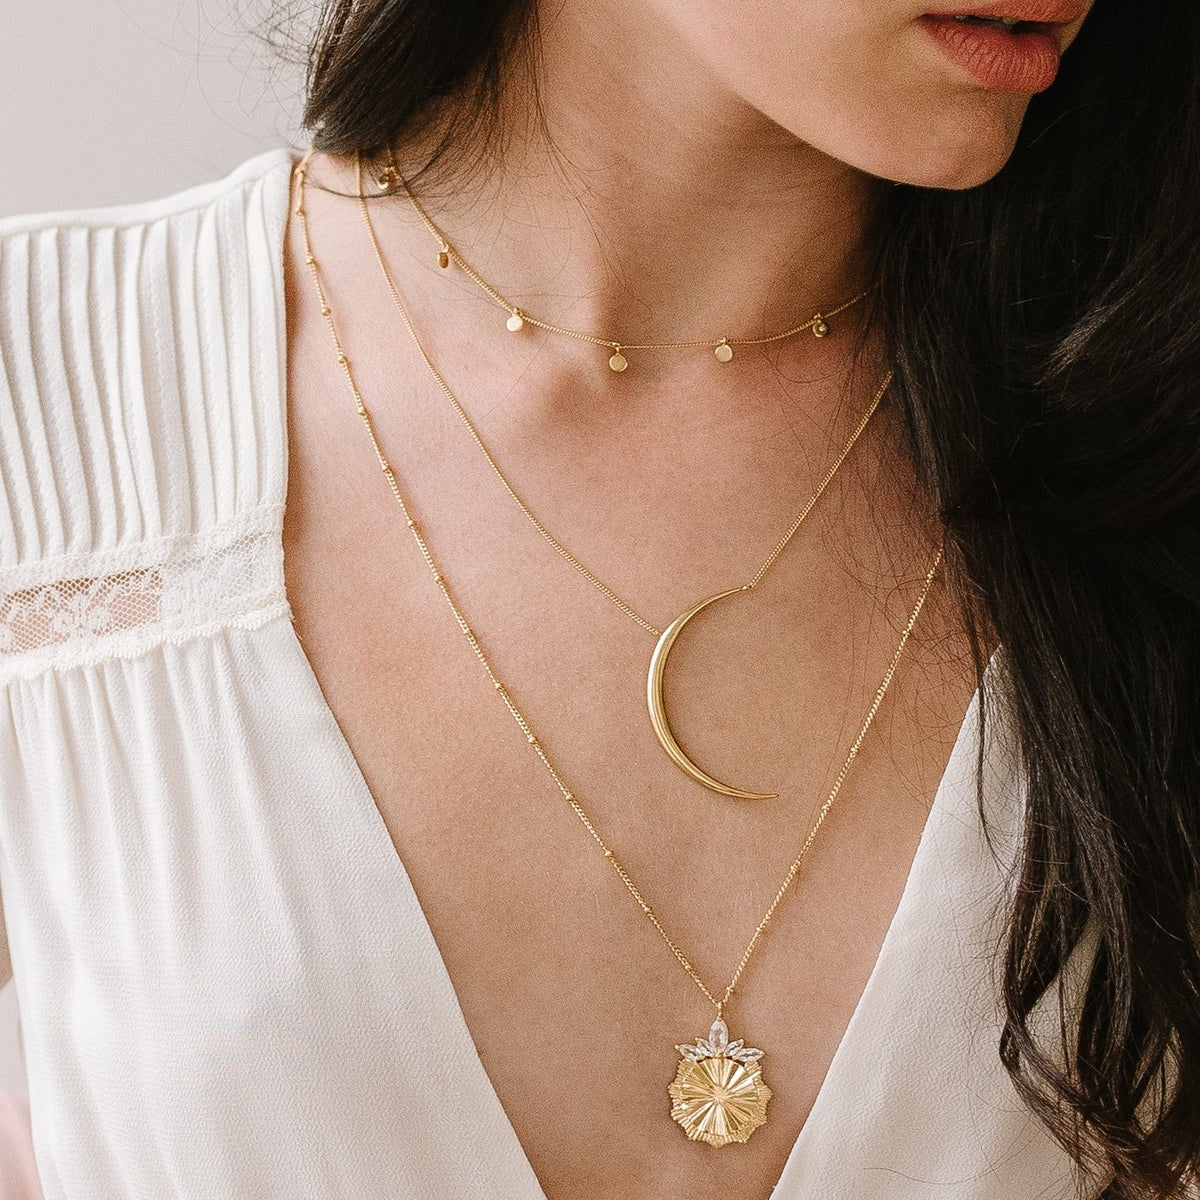 BELIEVE SOLEIL PENDANT NECKLACE - WHITE TOPAZ &amp; GOLD - SO PRETTY CARA COTTER